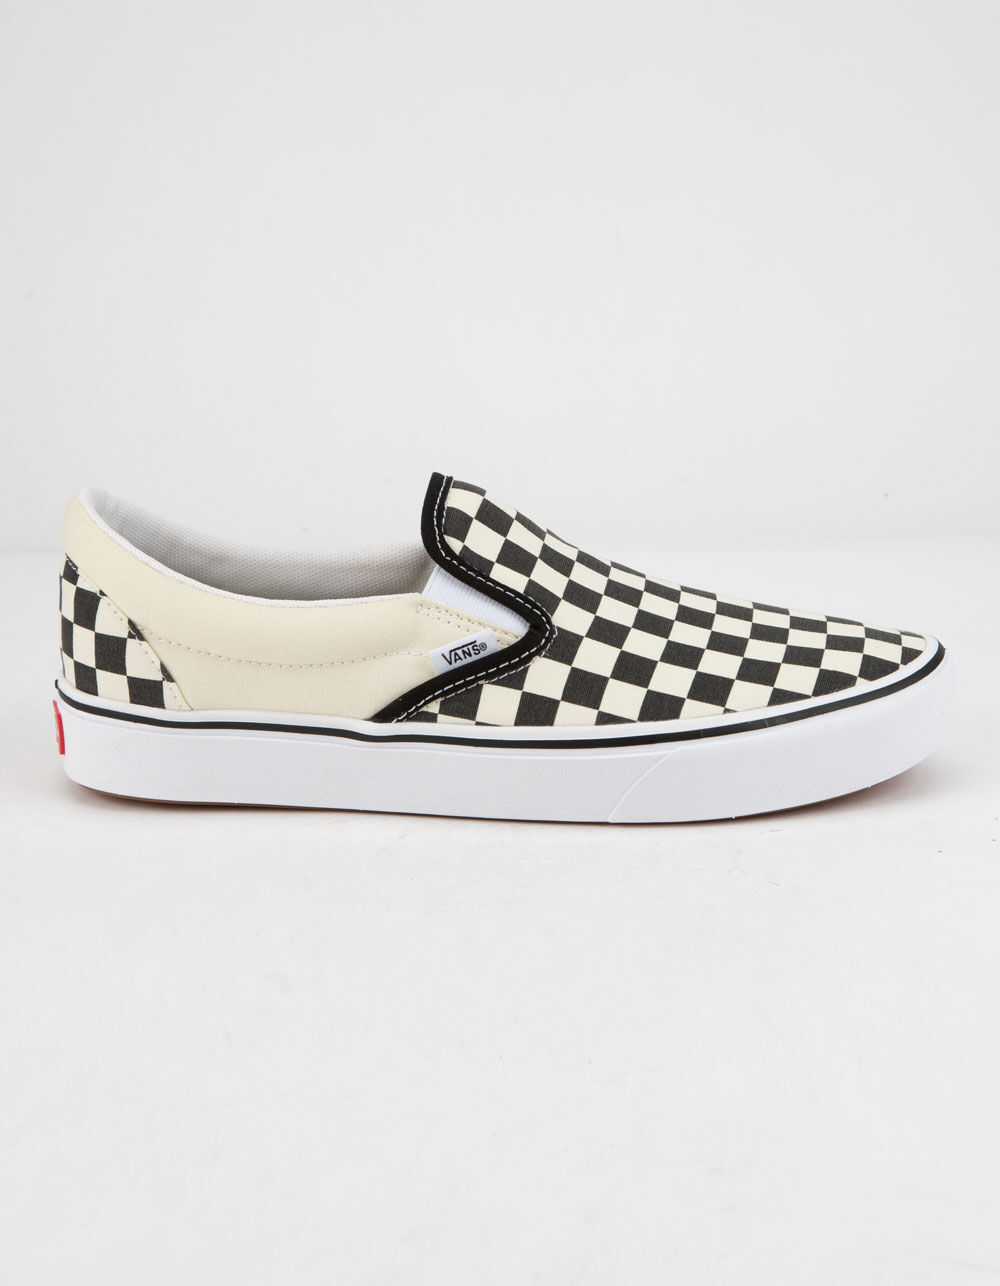 VANS ComfyCush Checkerboard Classic Slip-On Shoes - CHECKERBOARD | Tillys